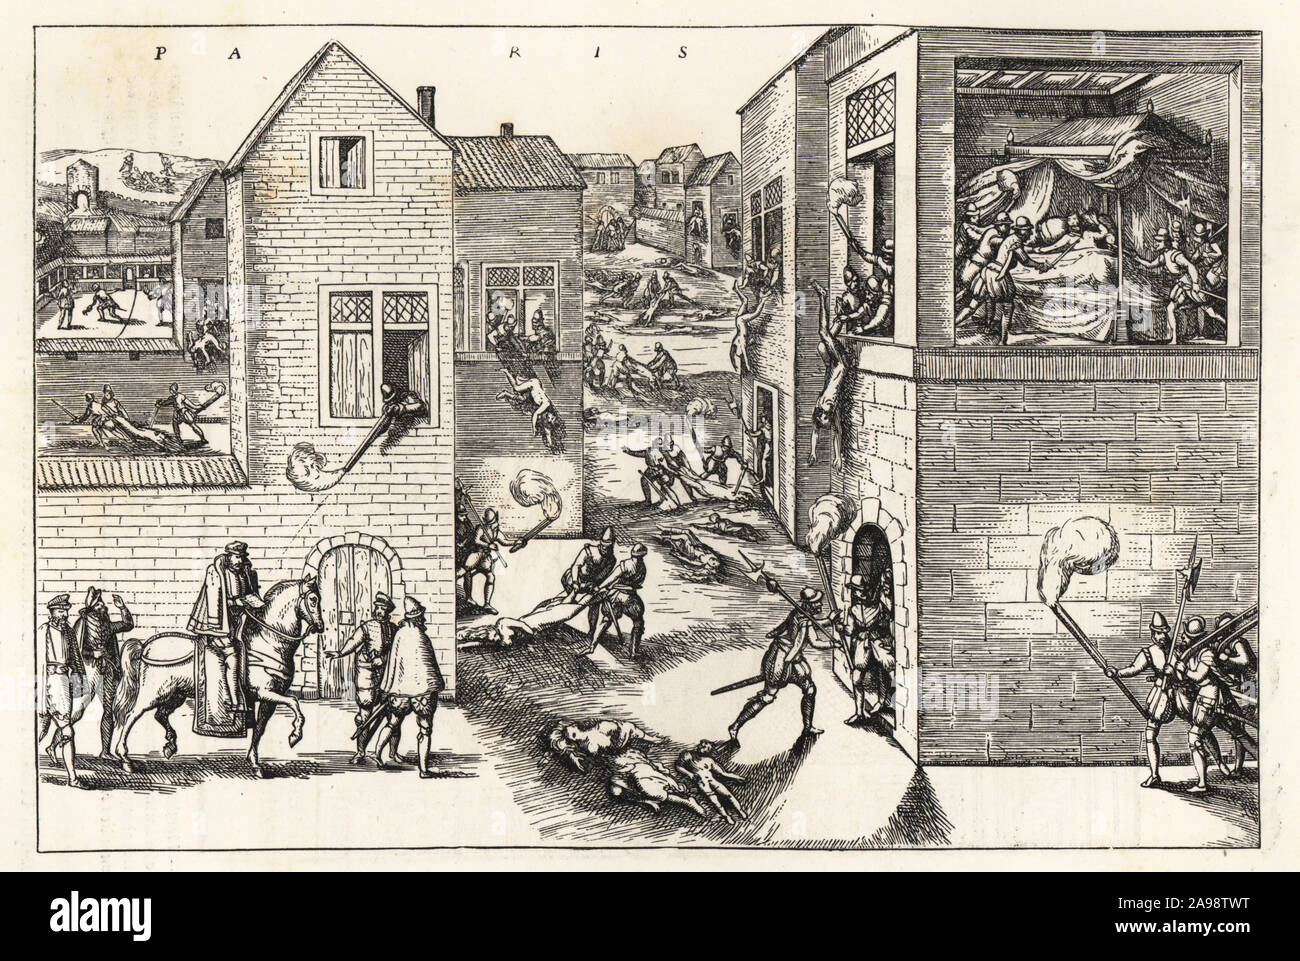 The Saint Bartholomew’s Day Massacre of the Huguenots in Paris, 24 August 1572. Admiral Coligny wounded by a musketeer at left, and finally stabbed in his hotel bed on rue Bethisy by Besme and defenestrated at right. Women and children slaughtered in the streets. From a German print by Frans Hogenberg. Massacre de la Saint Barthelemy, a Paris. woodcut, engraving, Etienne Huyot, Jules Huyot, Paul Lacroix, La Vie Militaire et Religieuse au Moyen Age et a l’Epoque de la Renaissance, Military,  Religious, Life, Middle Ages, Renaissance, costume, custom, Christianity, society, religion, Stock Photo